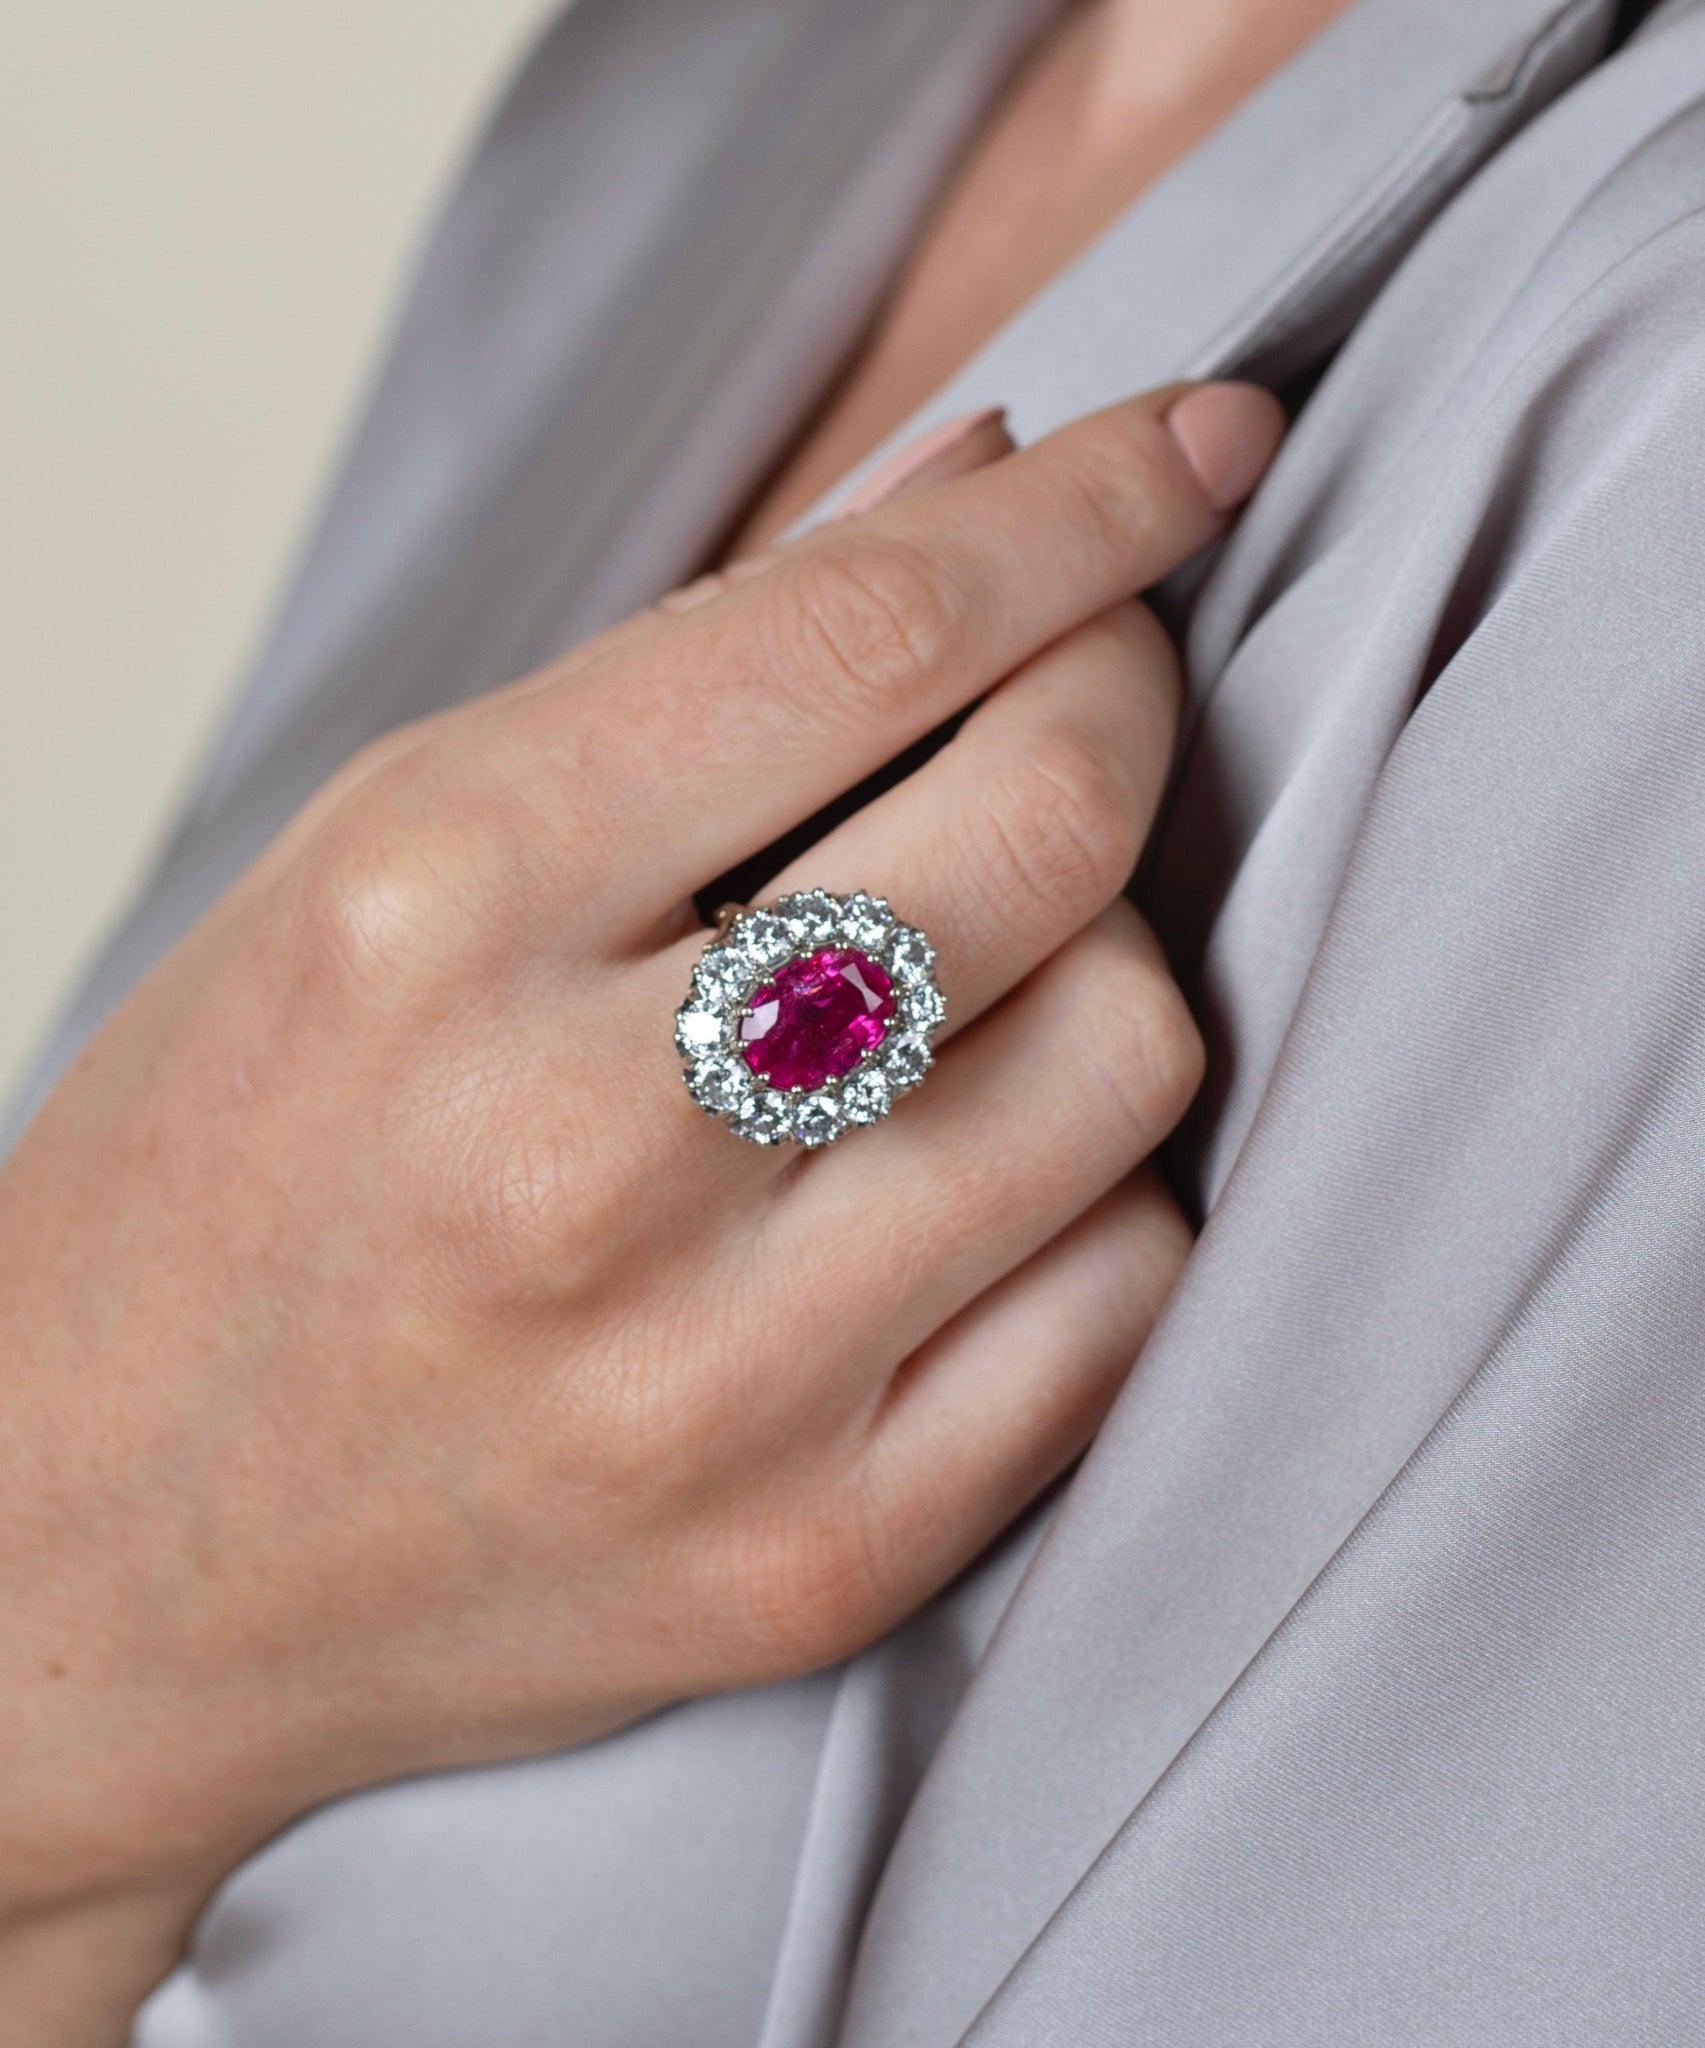 Art Deco AGL Certified No Heat 5.52 Carat Oval Cut Burma Ruby and Round Diamond Halo Ring-Rings-ASSAY